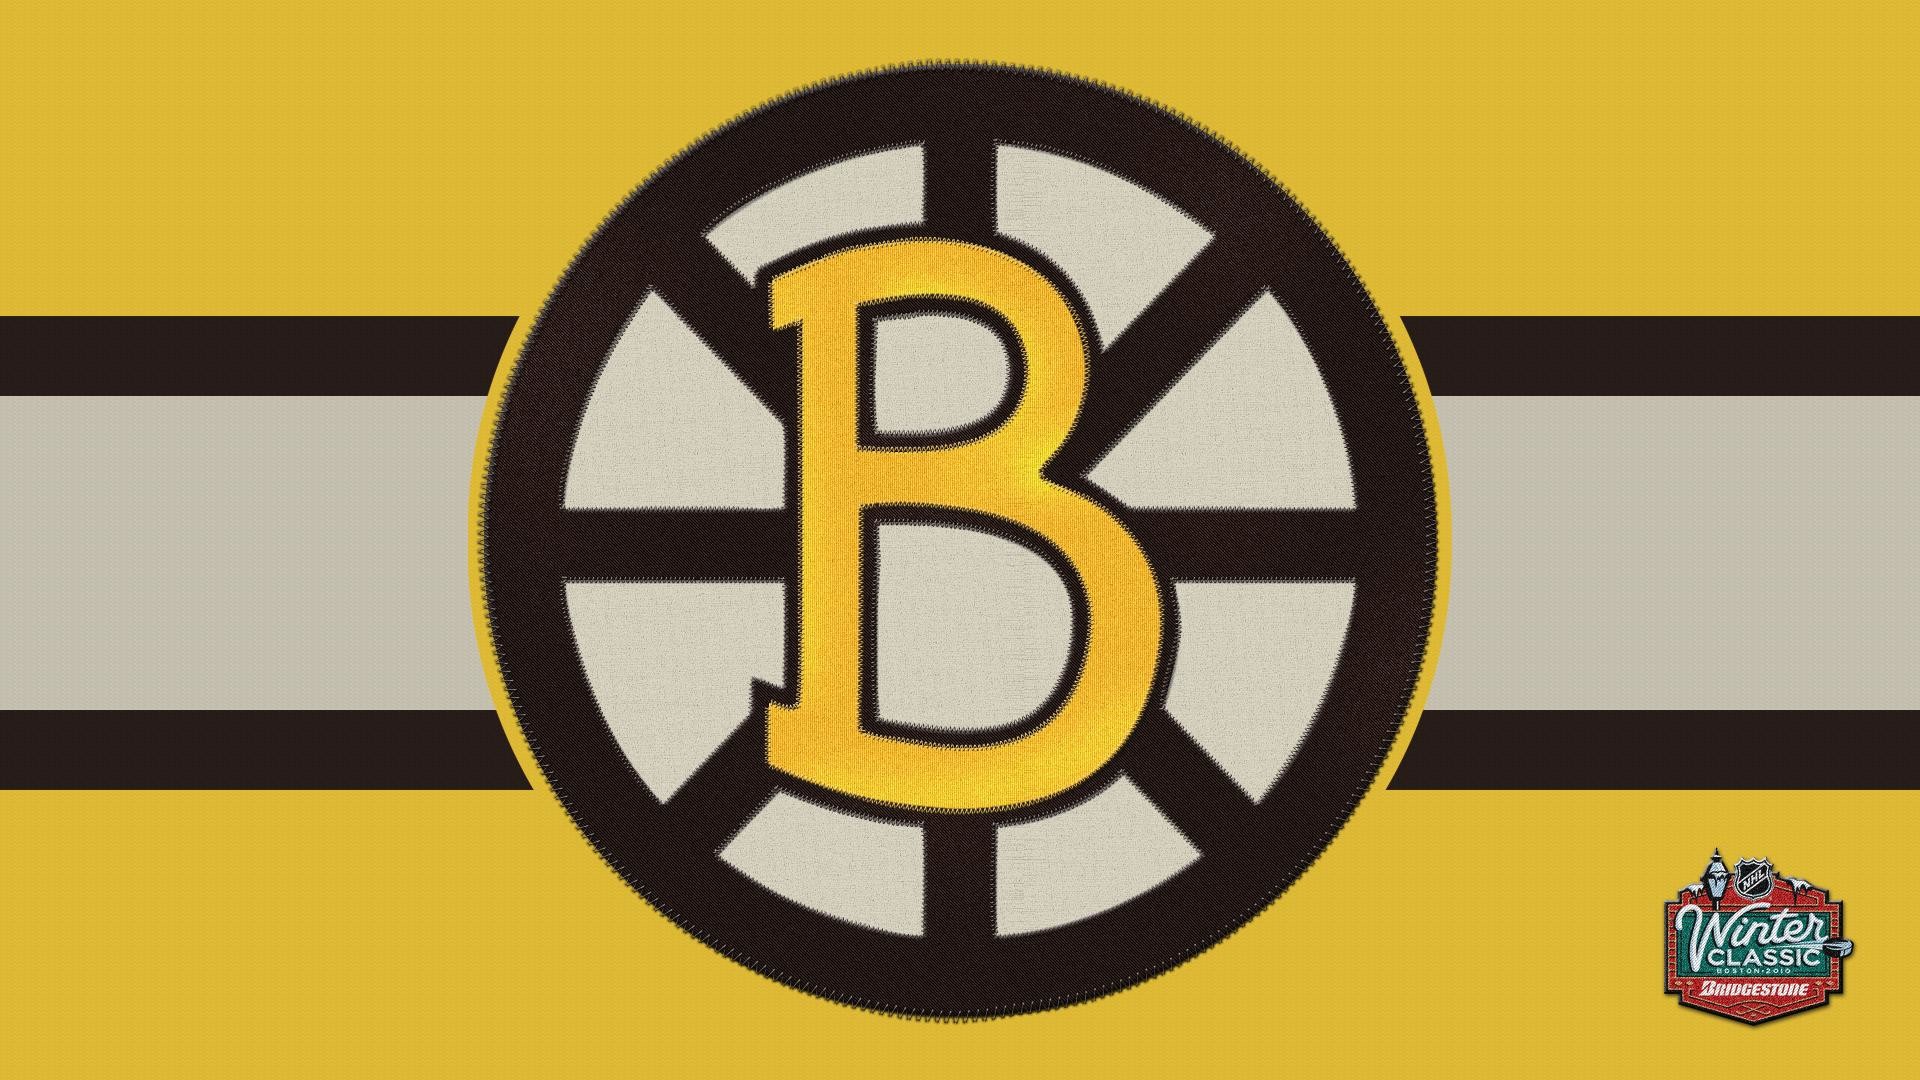 1920x1080 ... iphone hd; boston bruins wallpapers wallpaper cave; ucla ...